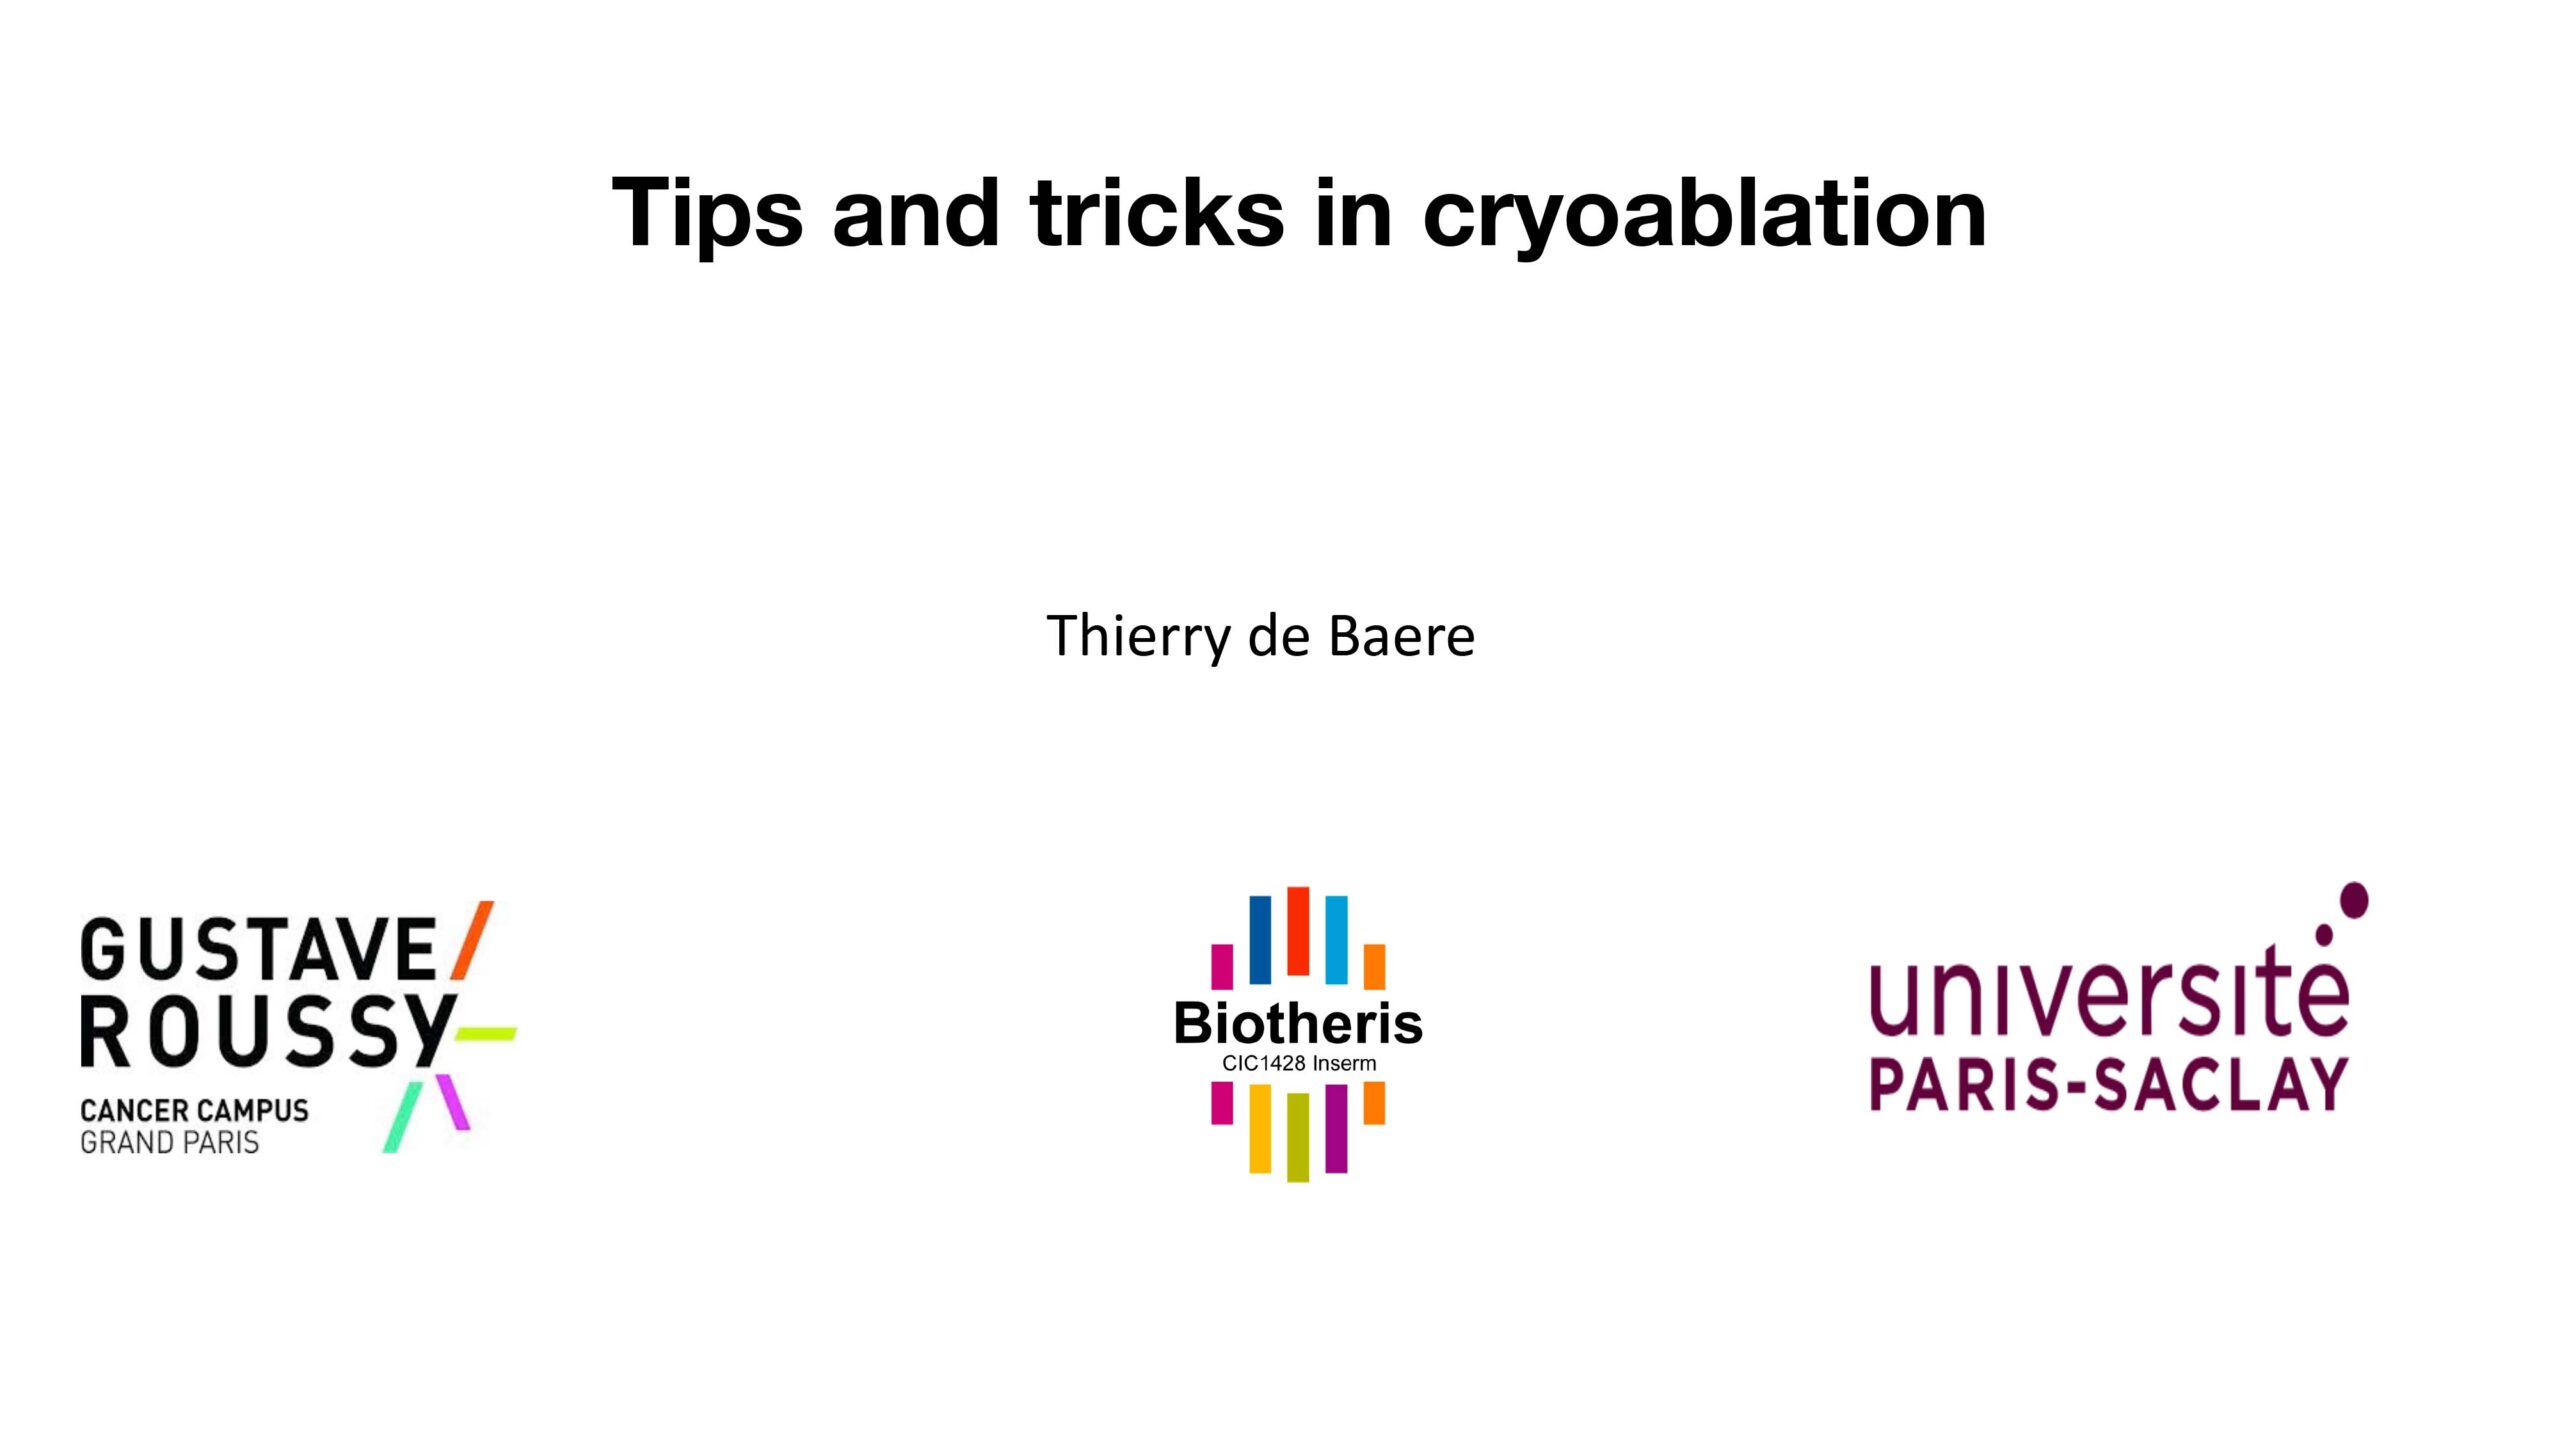 Tips and tricks in cryoablation